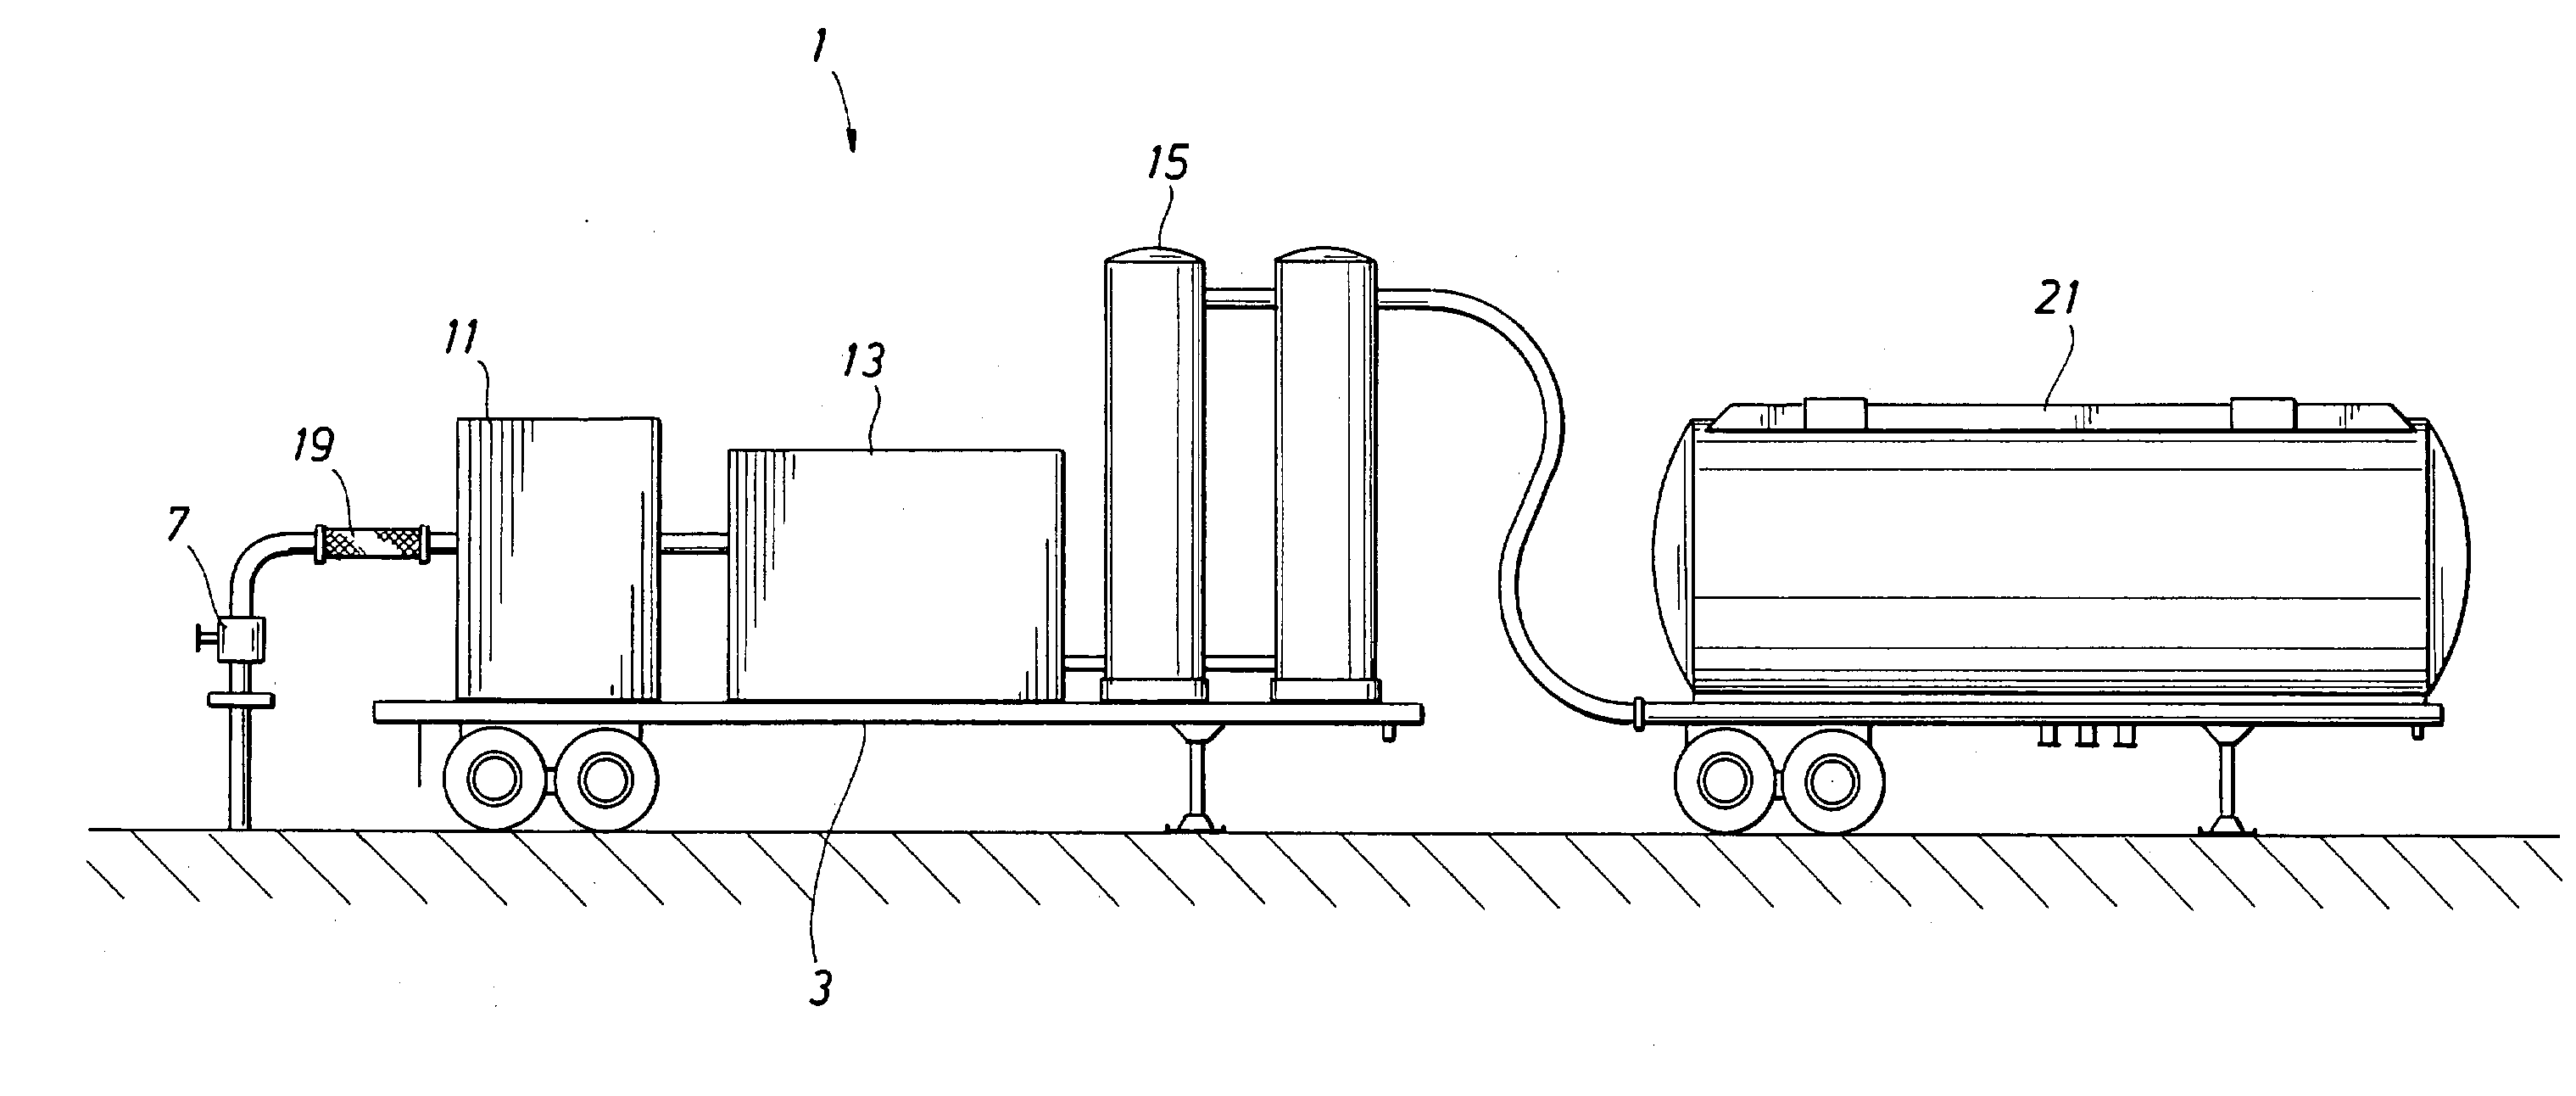 Portable gas-to-liquids unit and method for capturing natural gas at remote locations